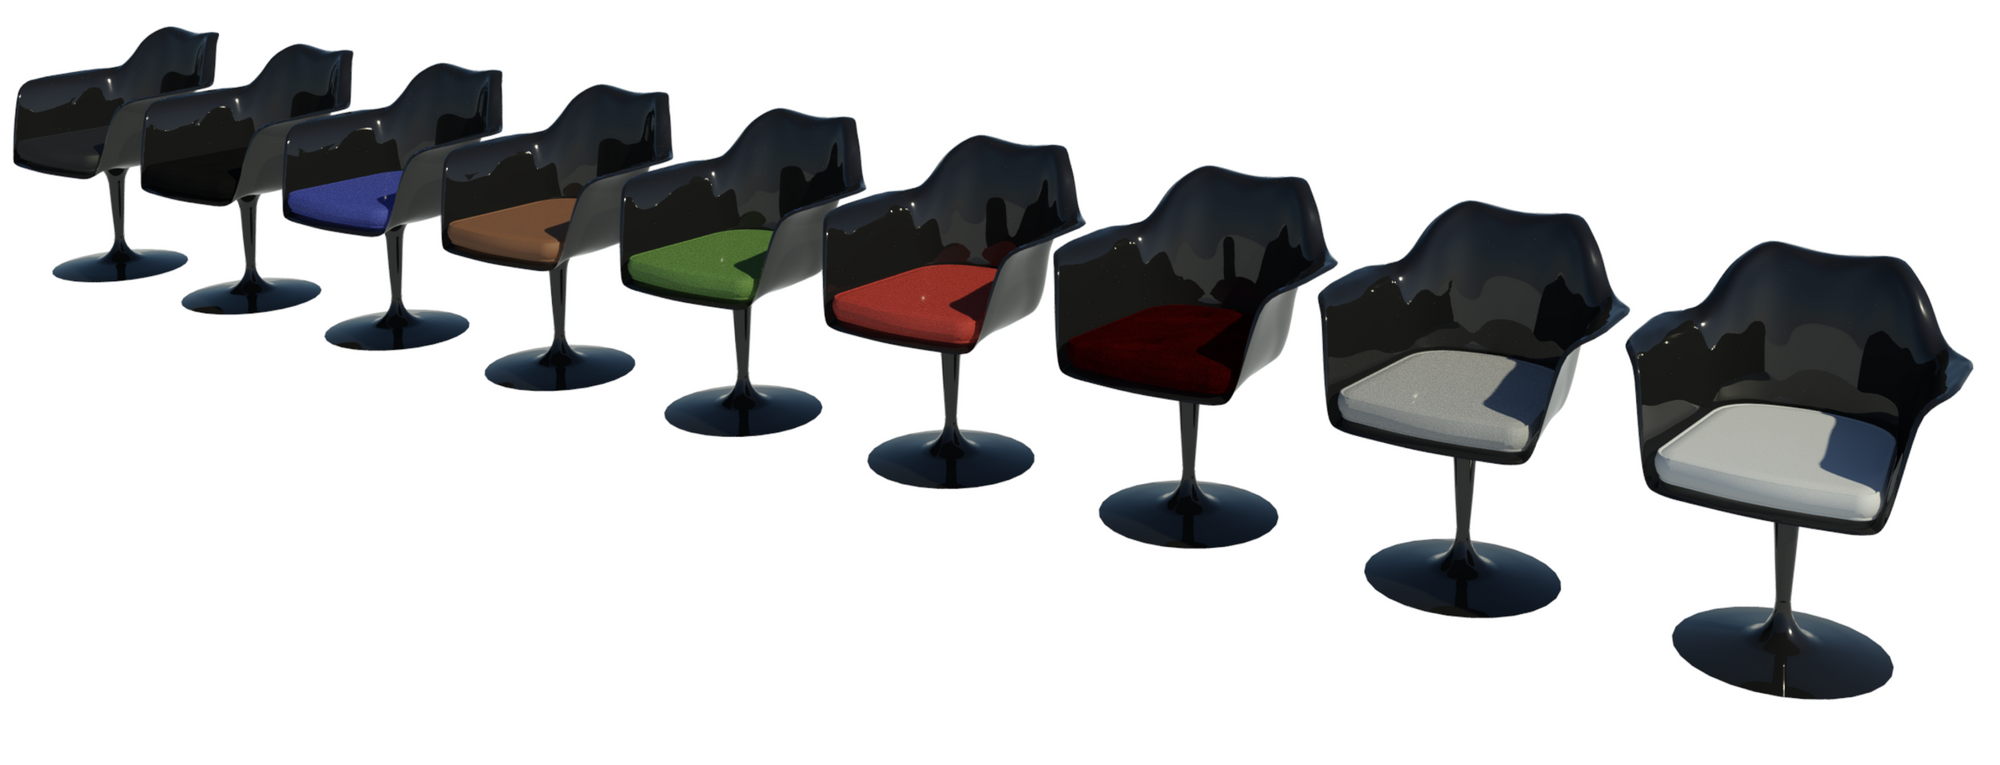 Revit raytrace showing nine black body types of Tulip chair.